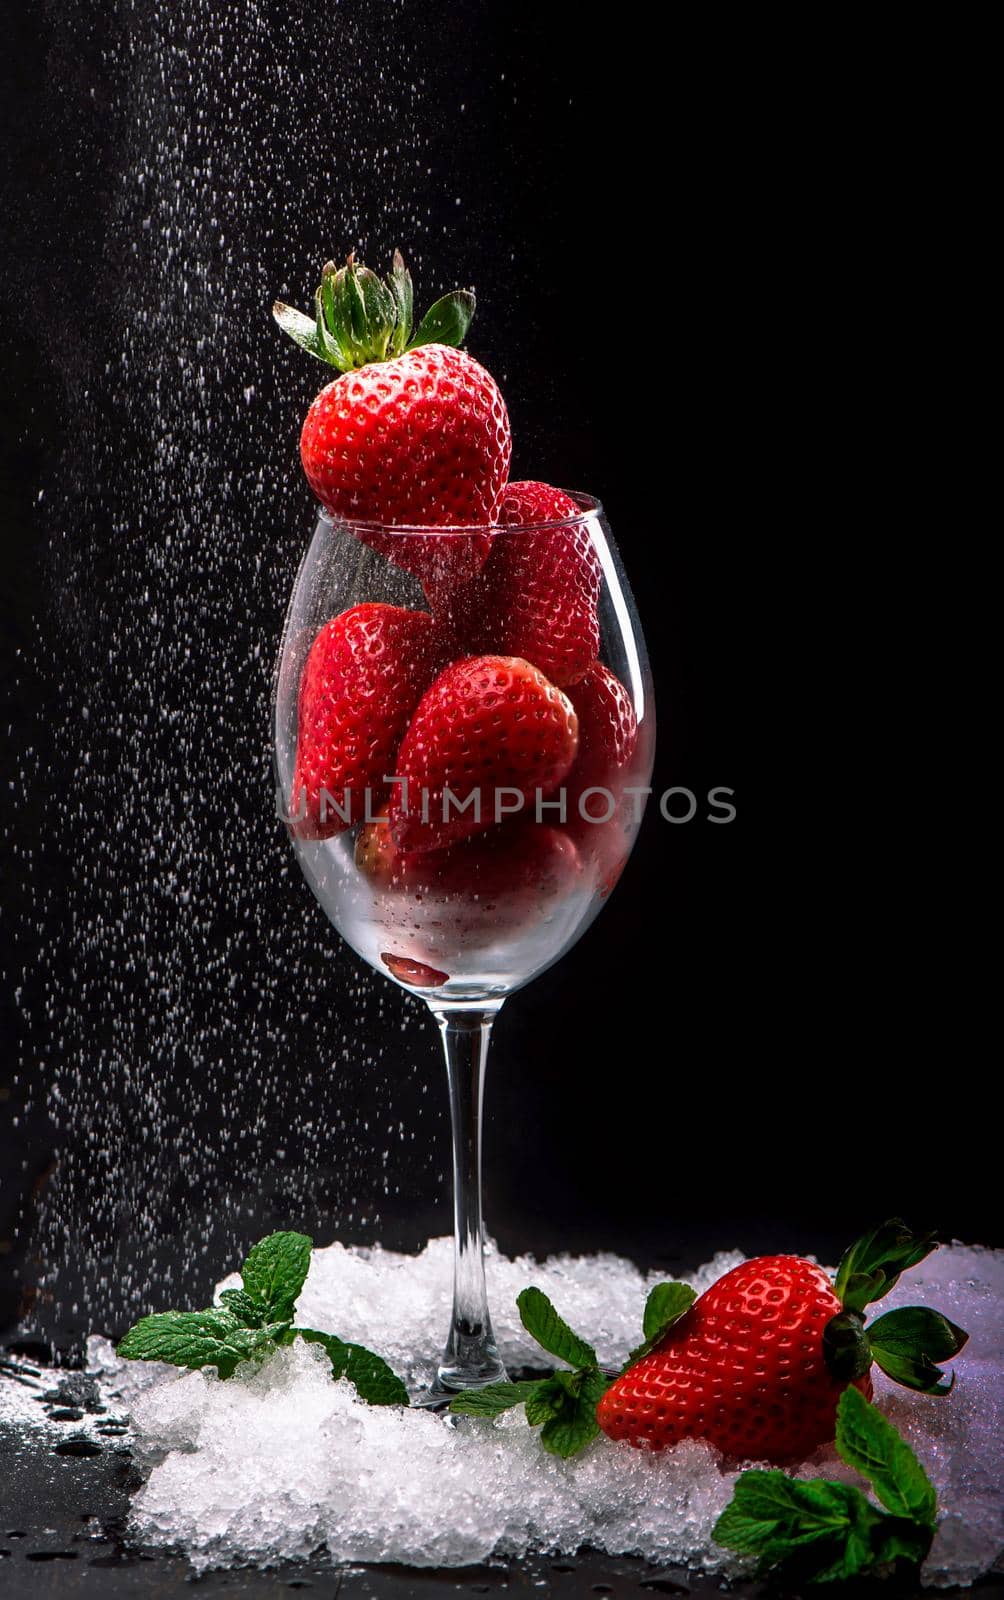 Strawberries in glass on the black background by aprilphoto